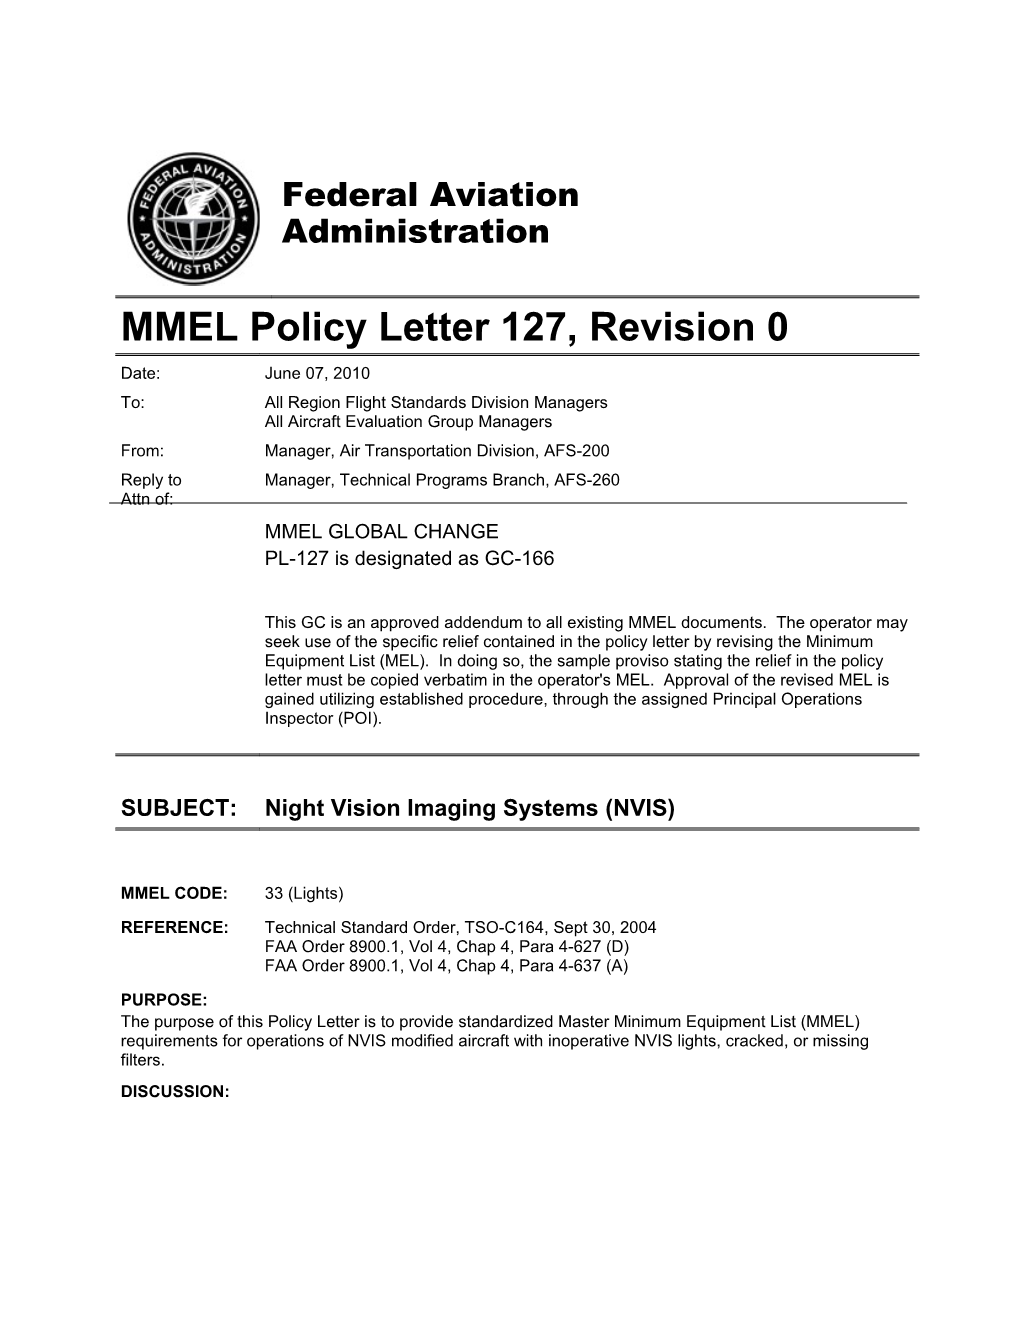 Policy Letter: Type PL # Revision # Draft